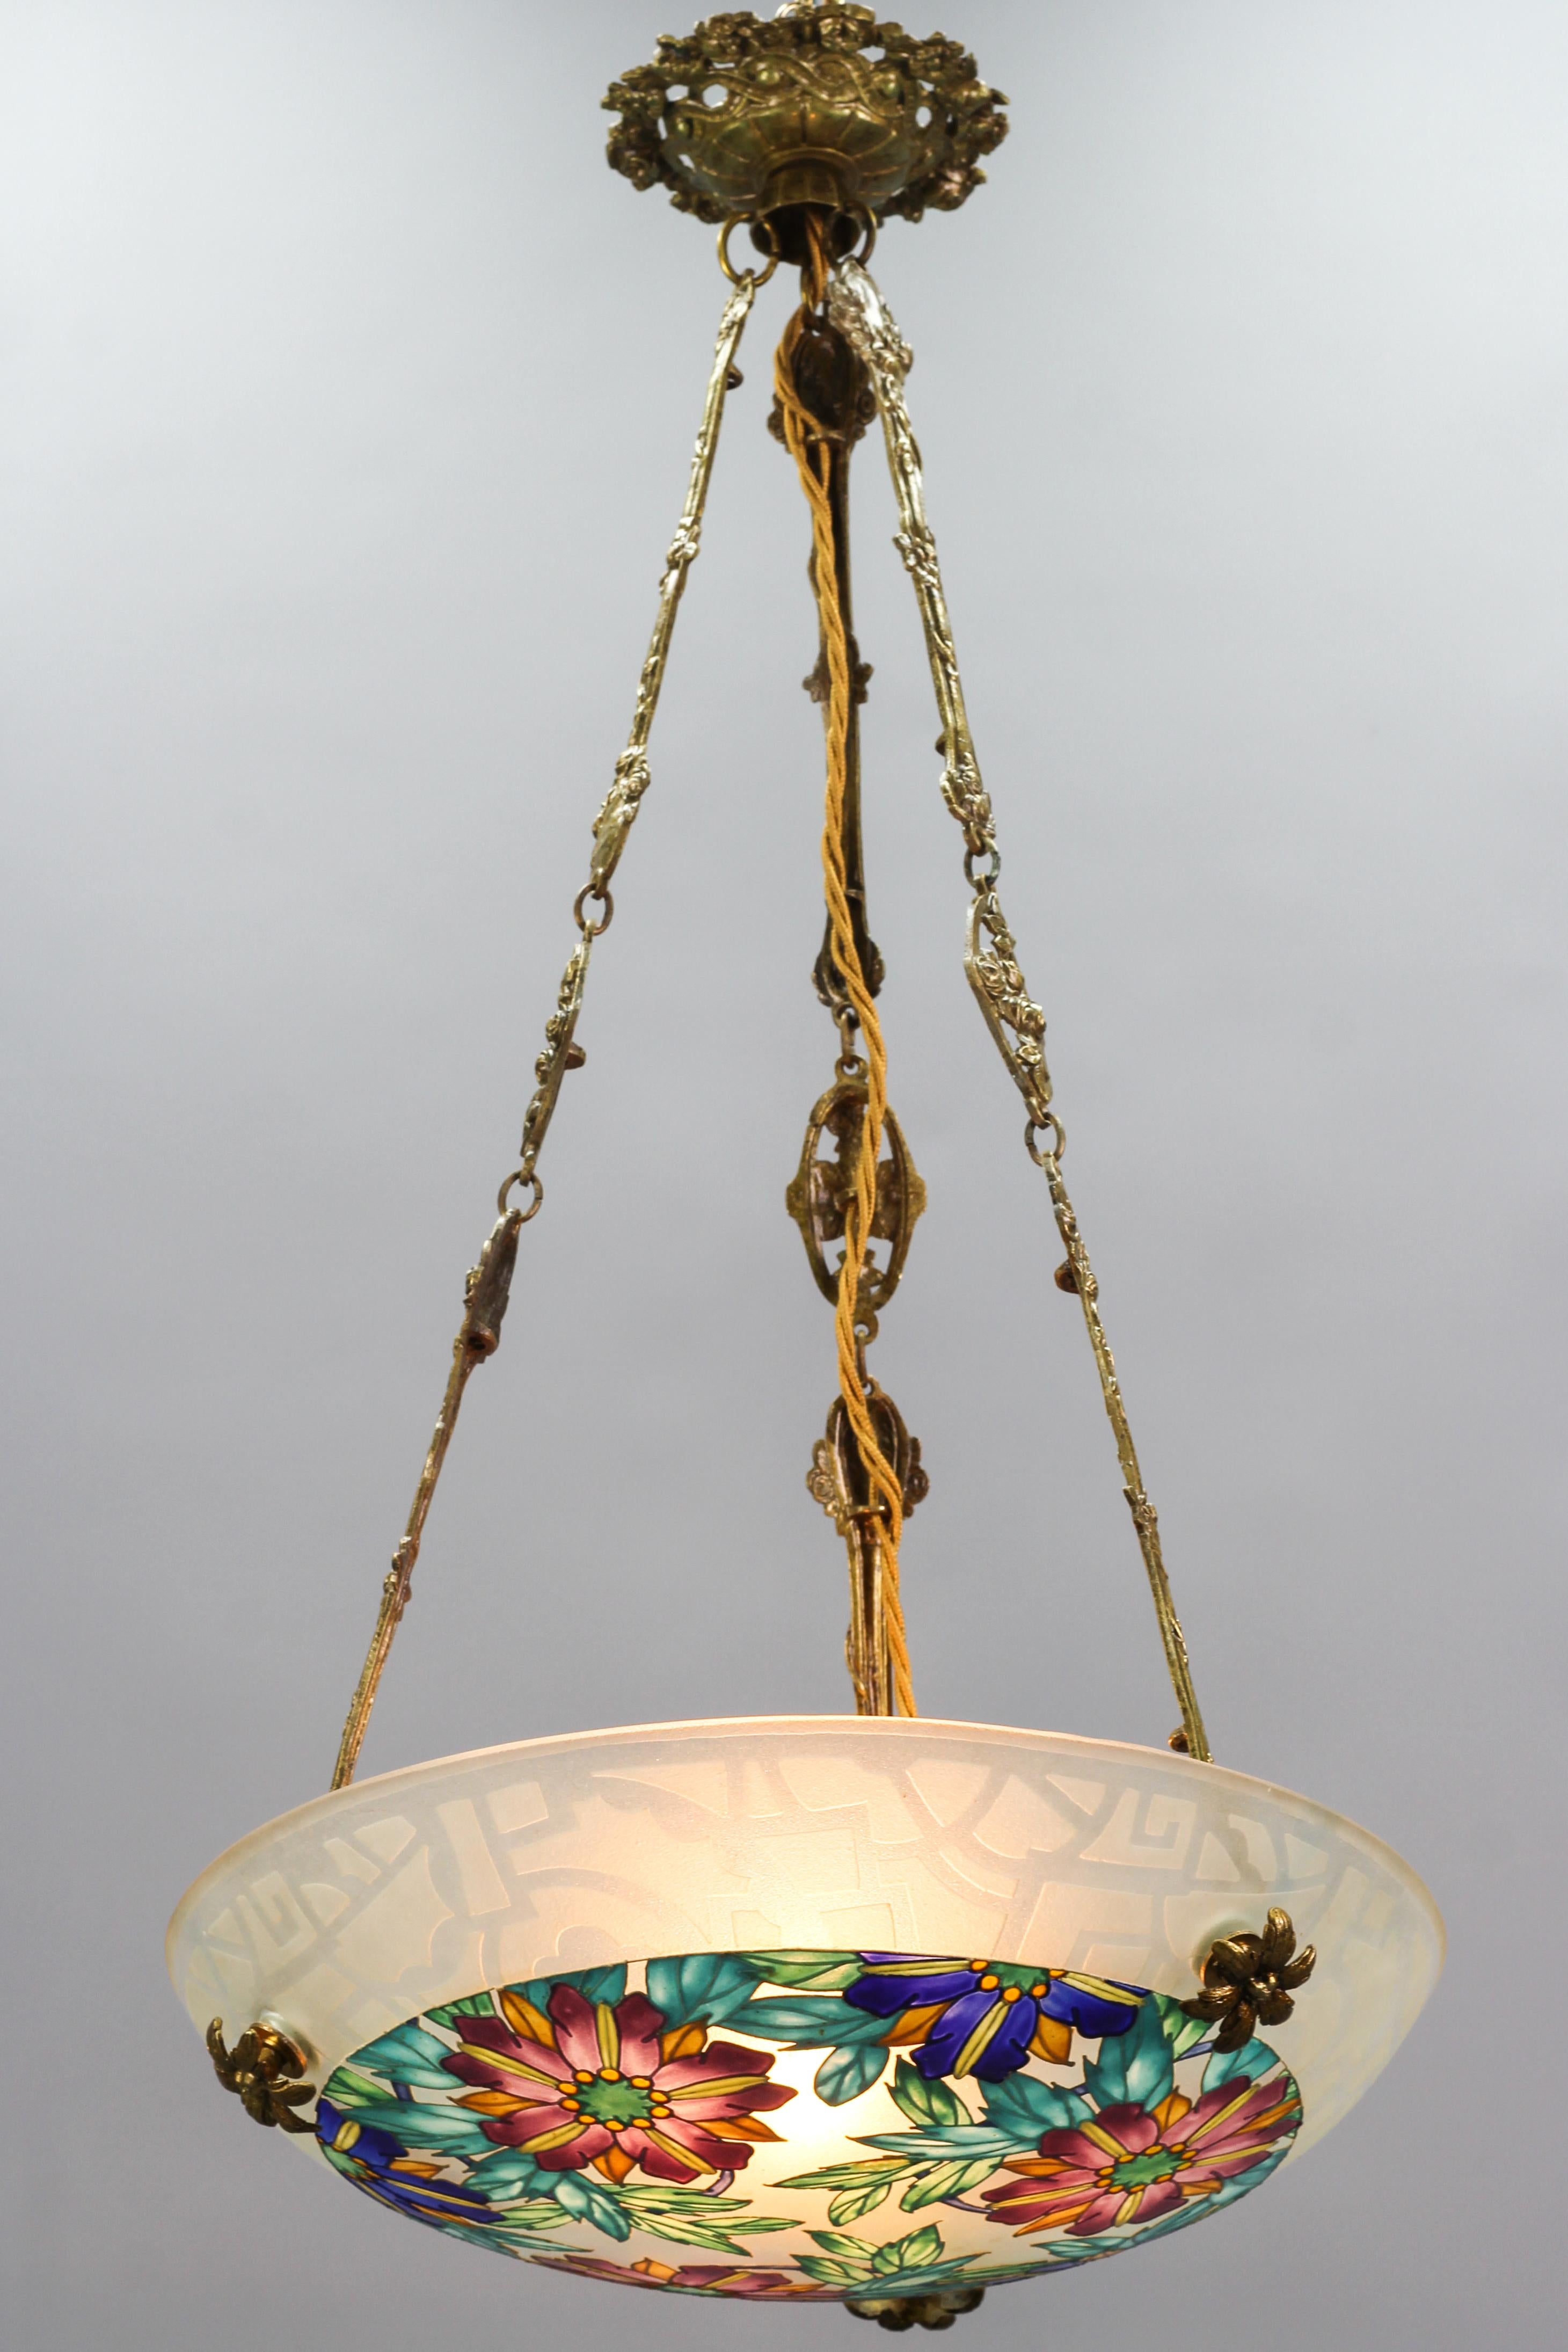 Art Deco Loys Lucha Signed Enameled Floral Glass and Bronze Pendant Light, 1930s For Sale 3